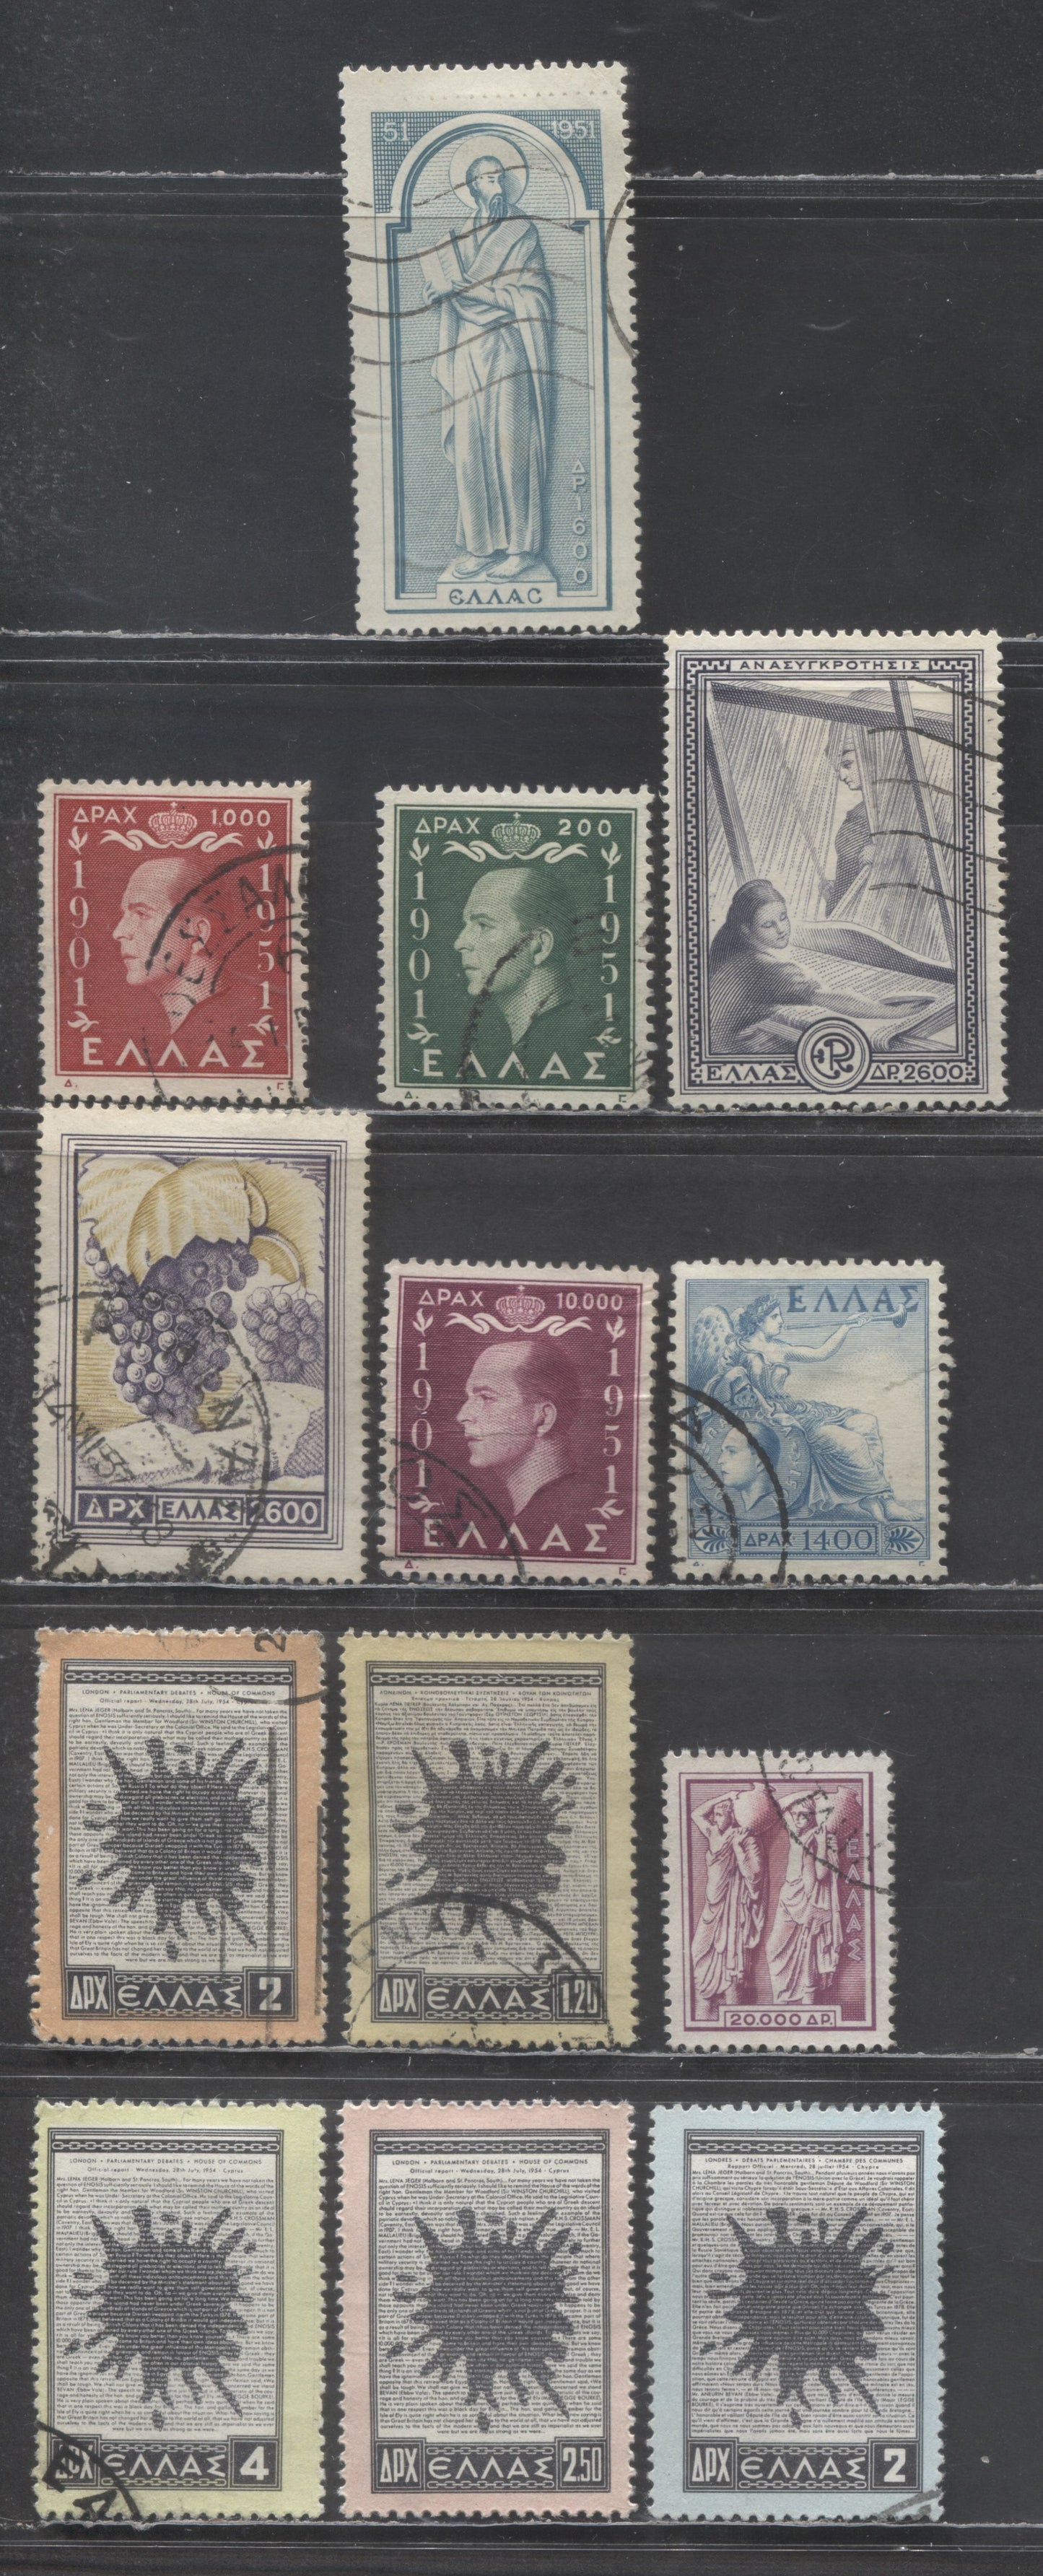 Lot 73 Greece SC#536/573 1951-1954 1900th Anniversary Of St Paul's Visit To Athens - Proposed Union Of Cyprus & Greece, 13 Fine/Very Fine Used Singles, Click on Listing to See ALL Pictures, Estimated Value $35